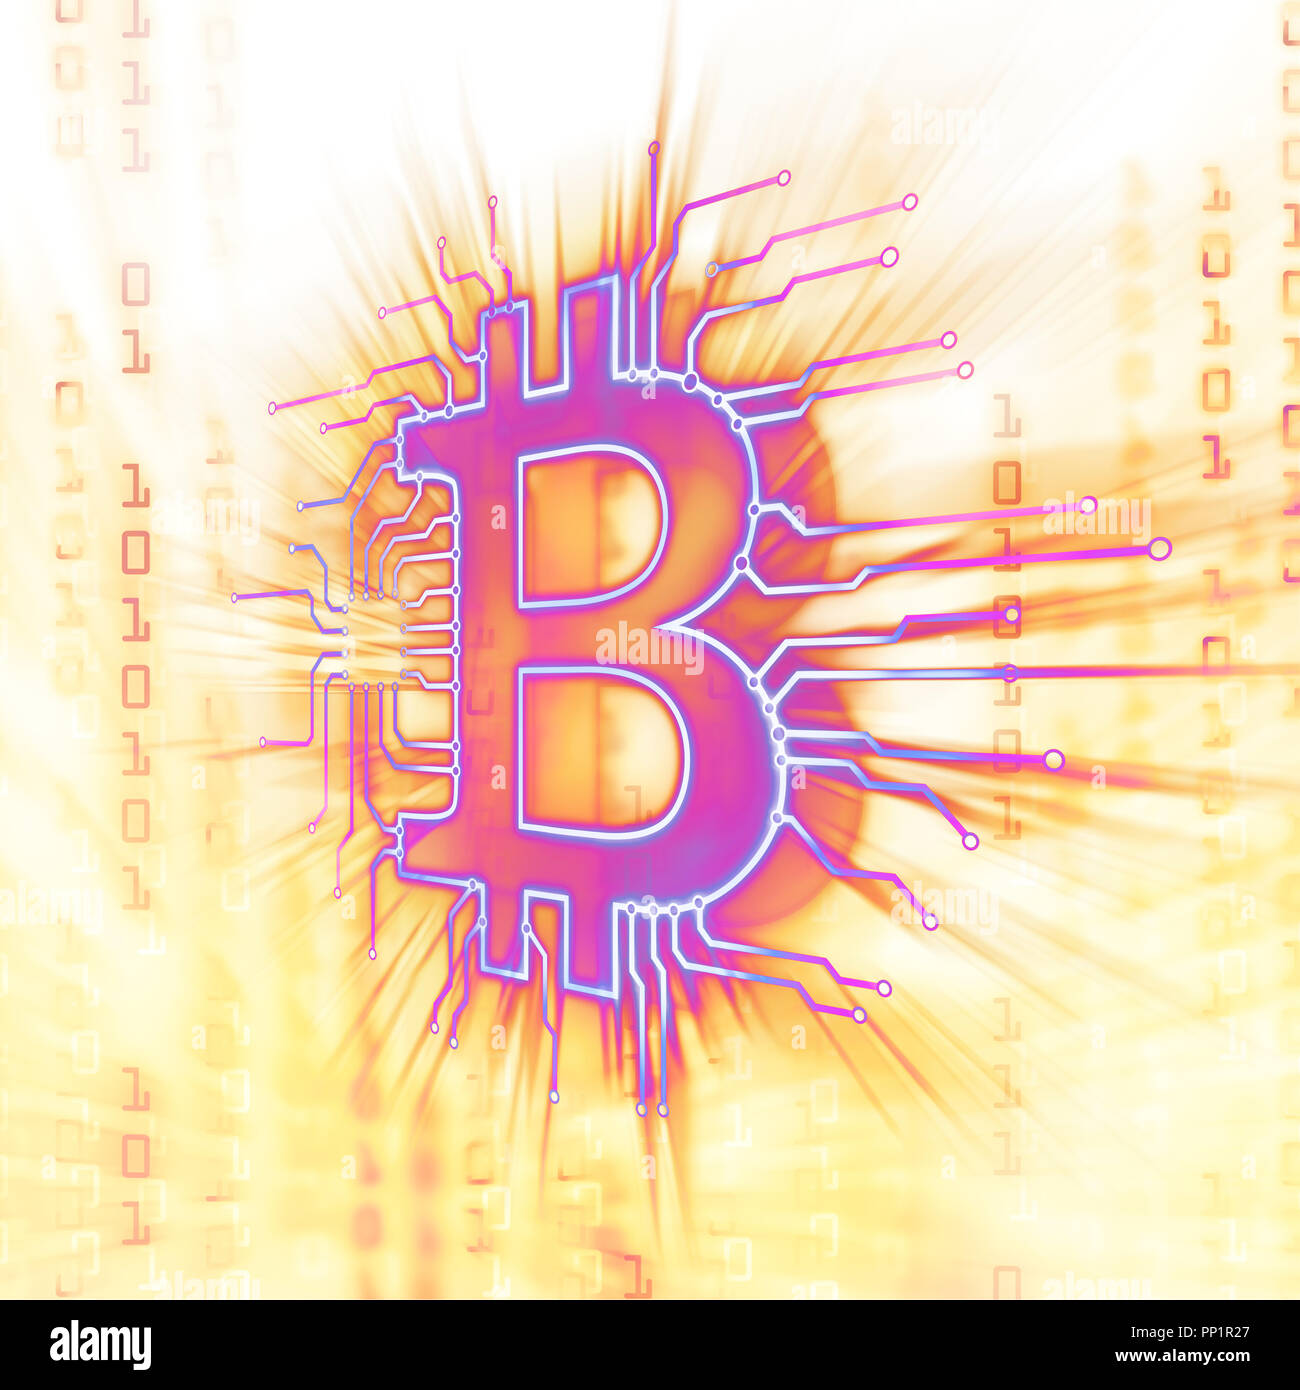 Bitcoin ₿ cryptocurrency in blockchain network, digital currency symbol, conceptual illustration in bright glowing purple yellow colors Stock Photo